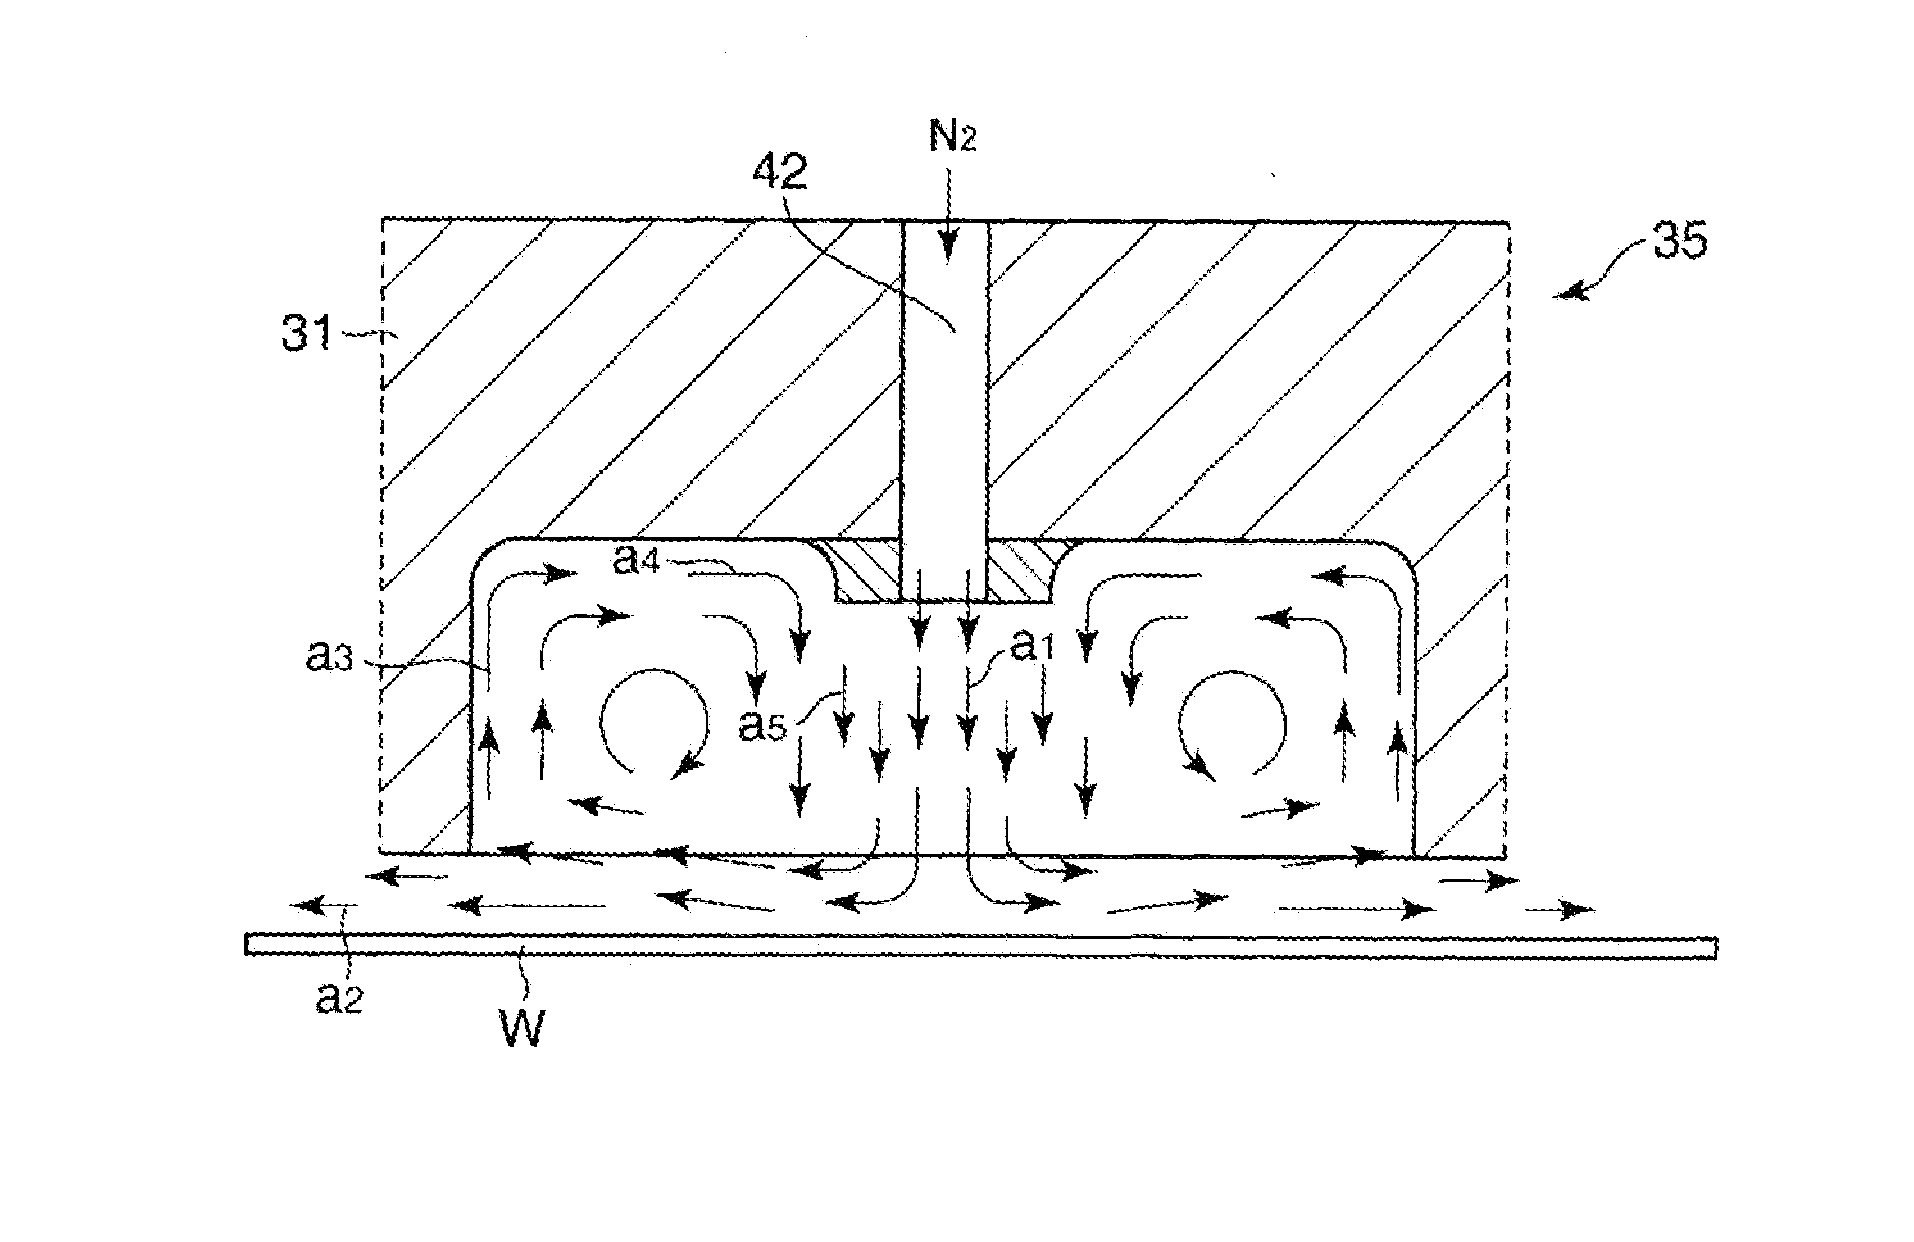 Substrate cooling member, substrate processing device, and substrate processing method